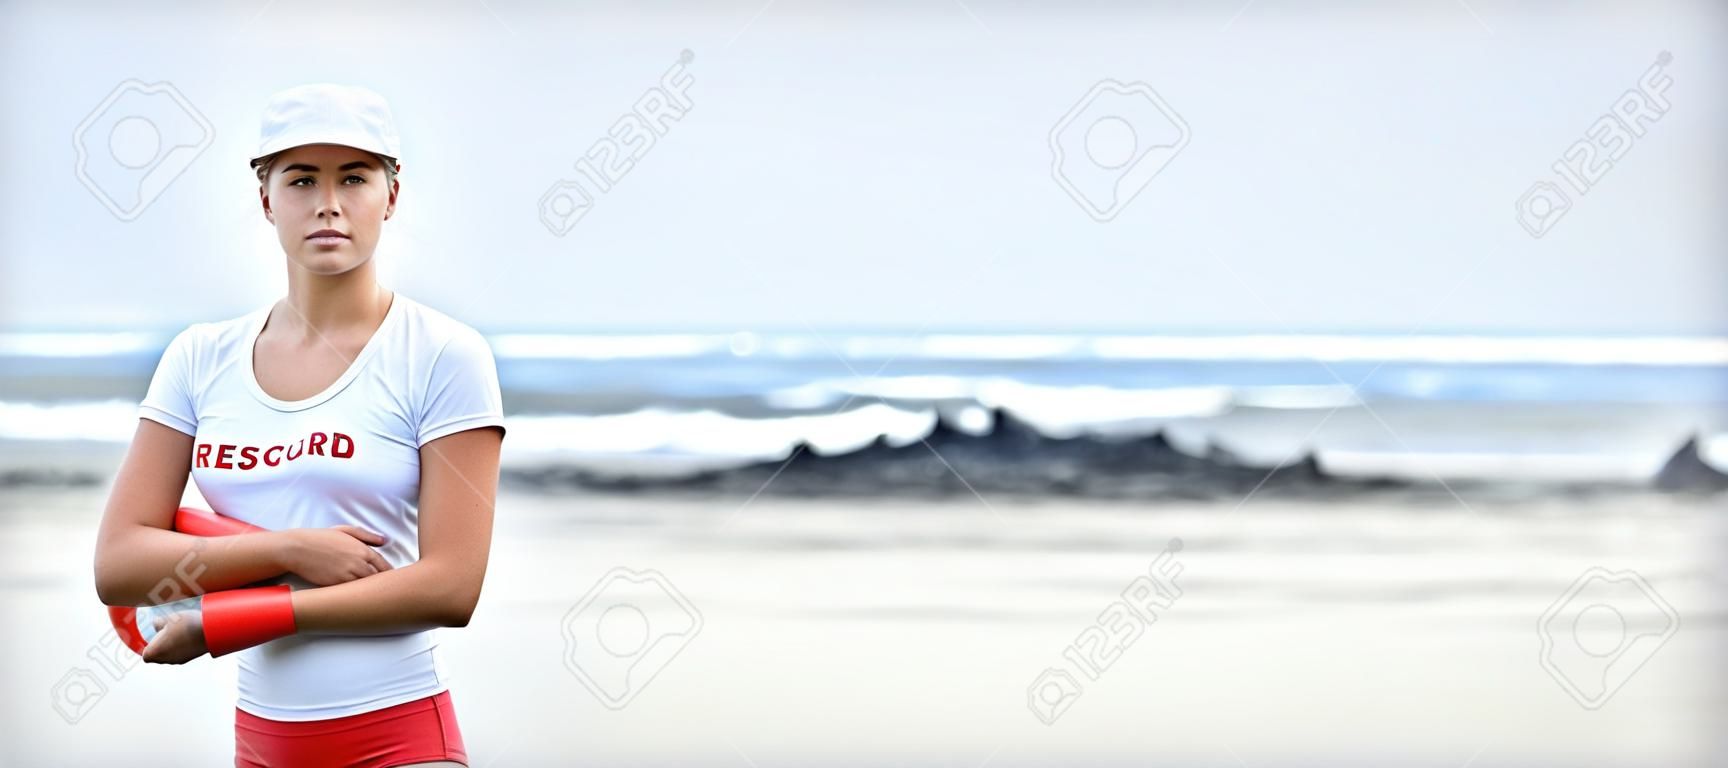 Portrait of female lifeguard holding rescue buoy against view of waves